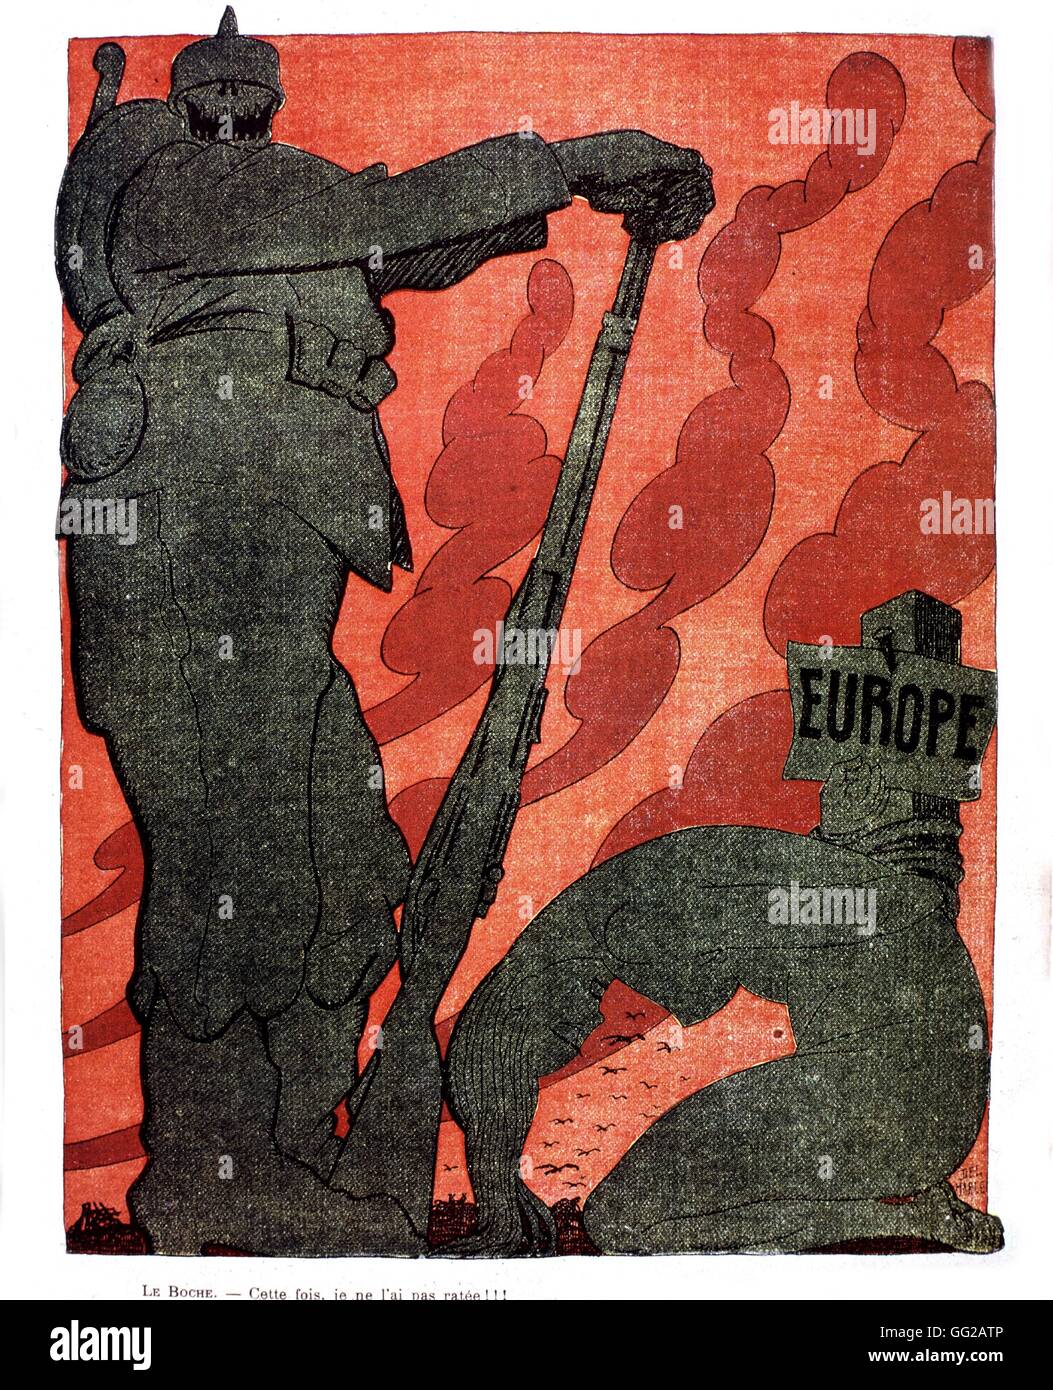 Caricature by Del Marle The 'Kraut' and Europe 1921 France Stock Photo